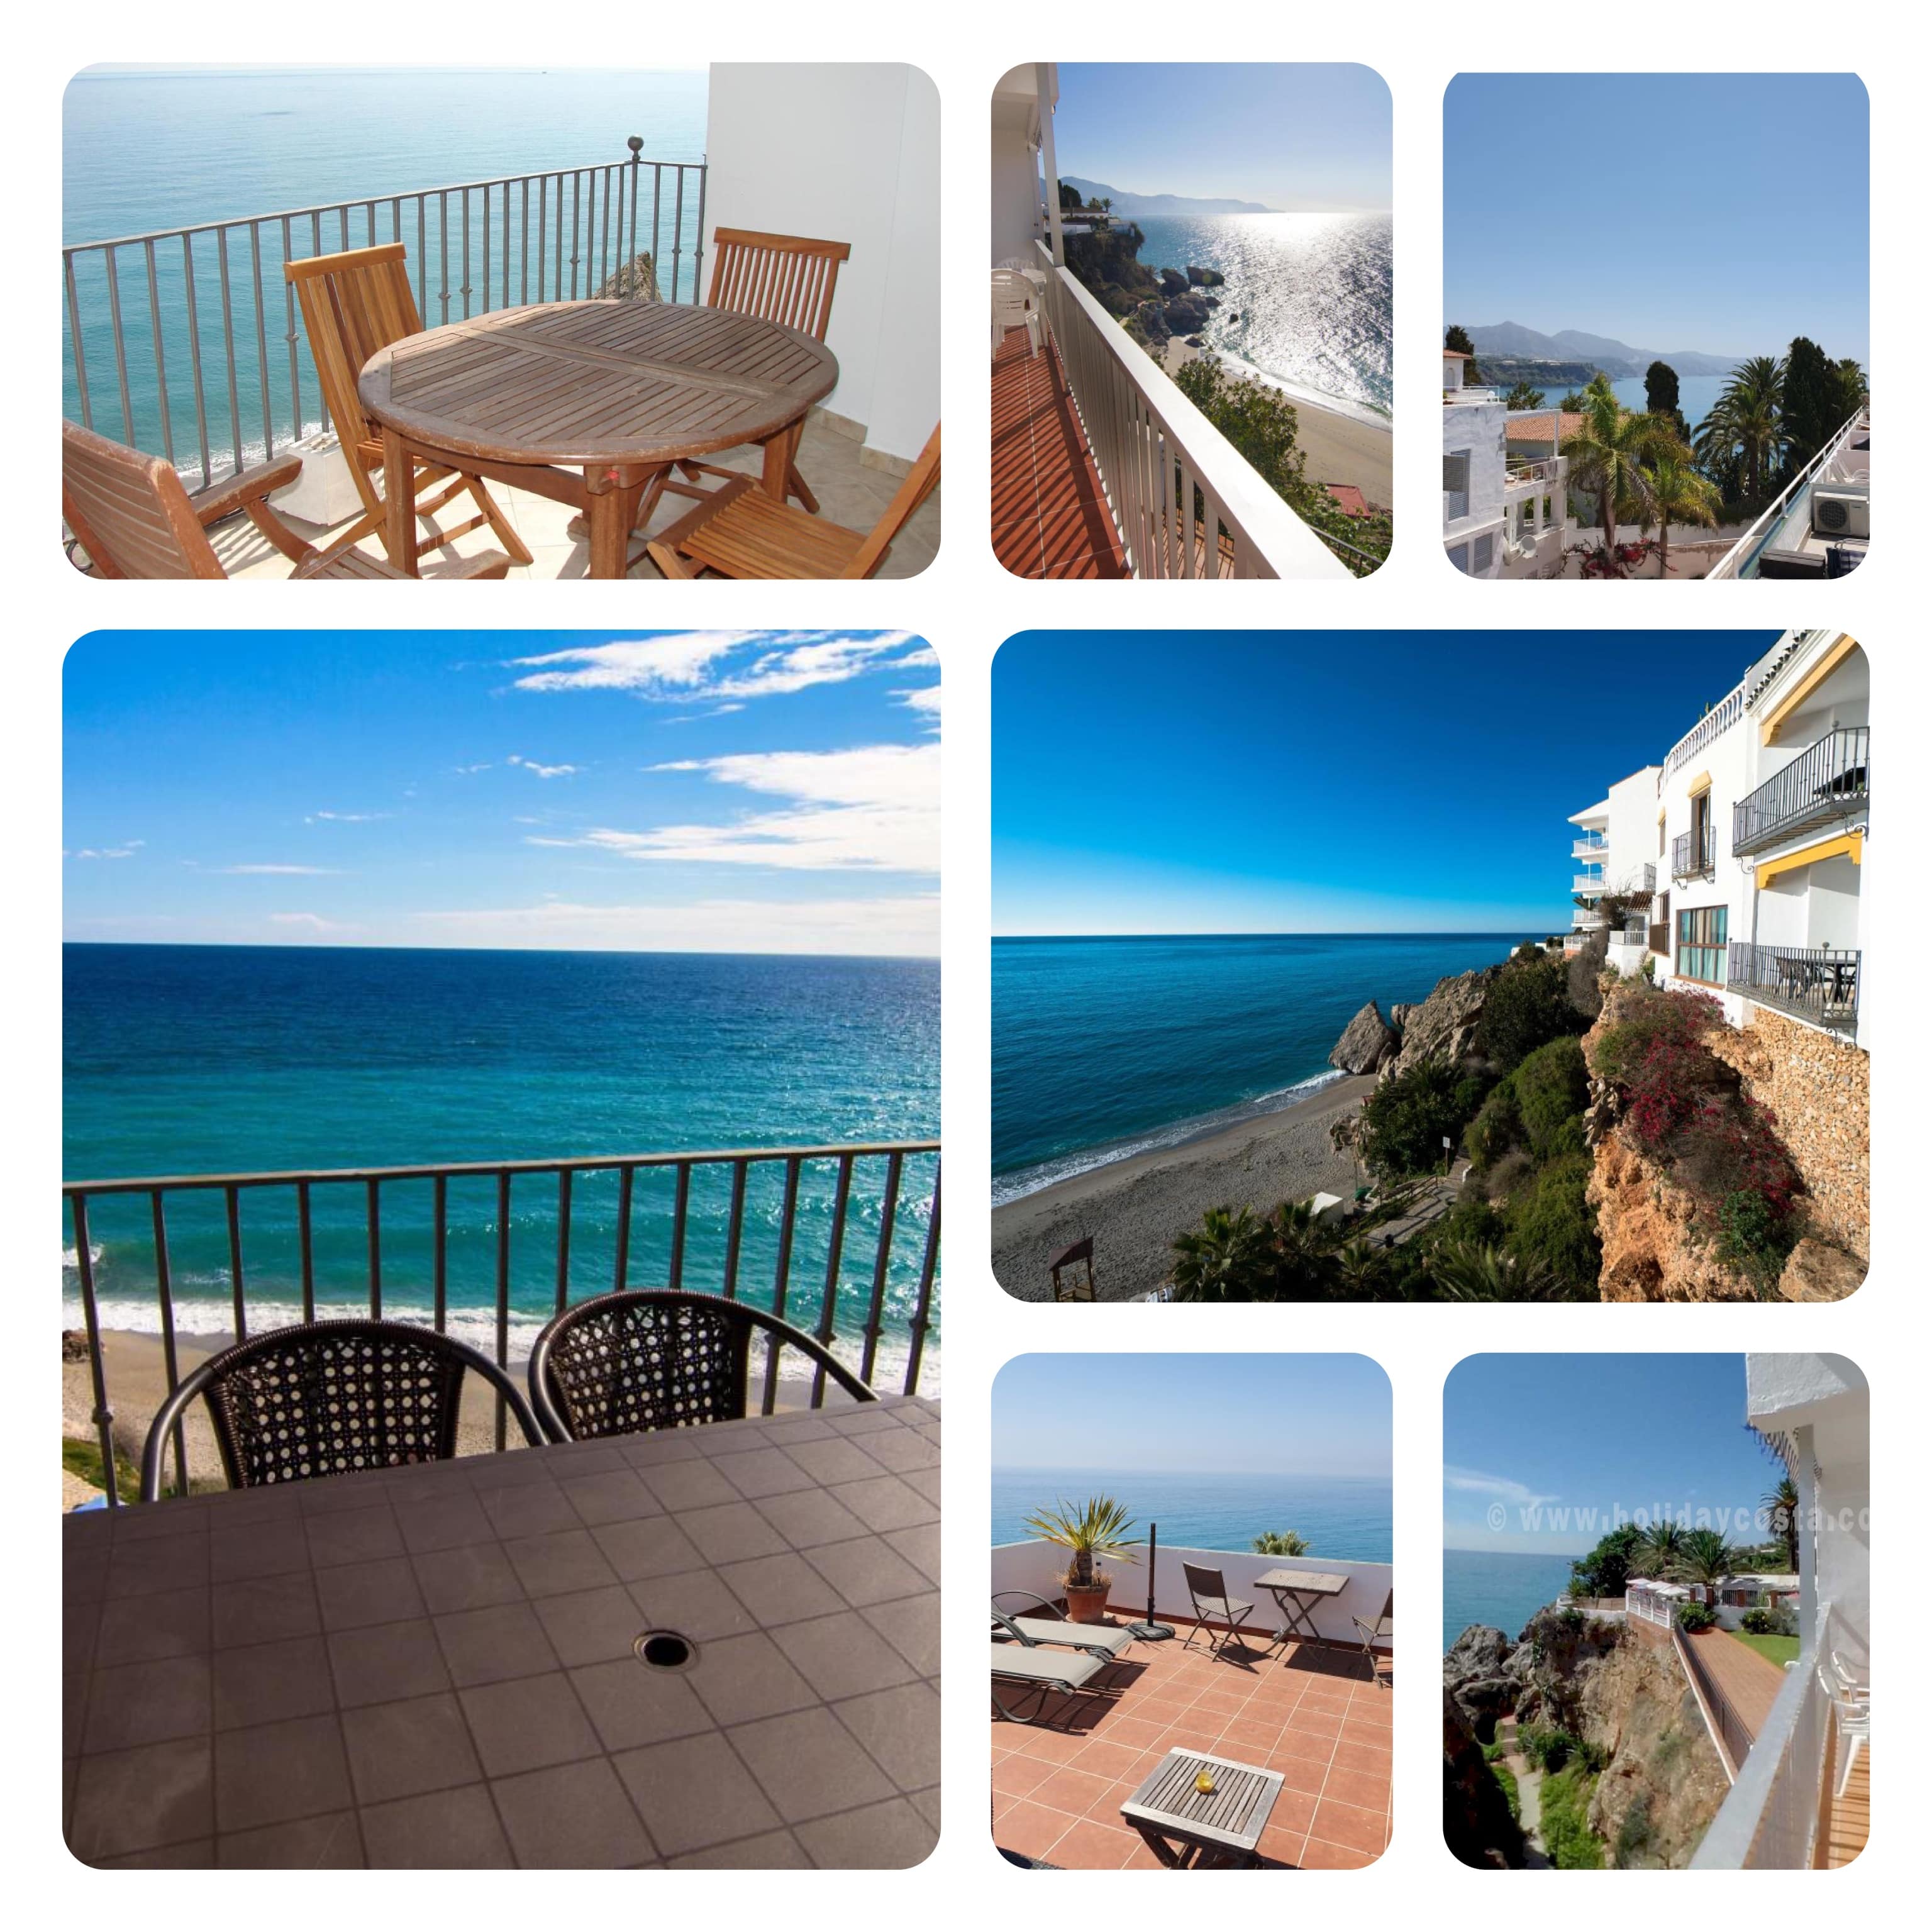 Calle Carabeo apartments nerja